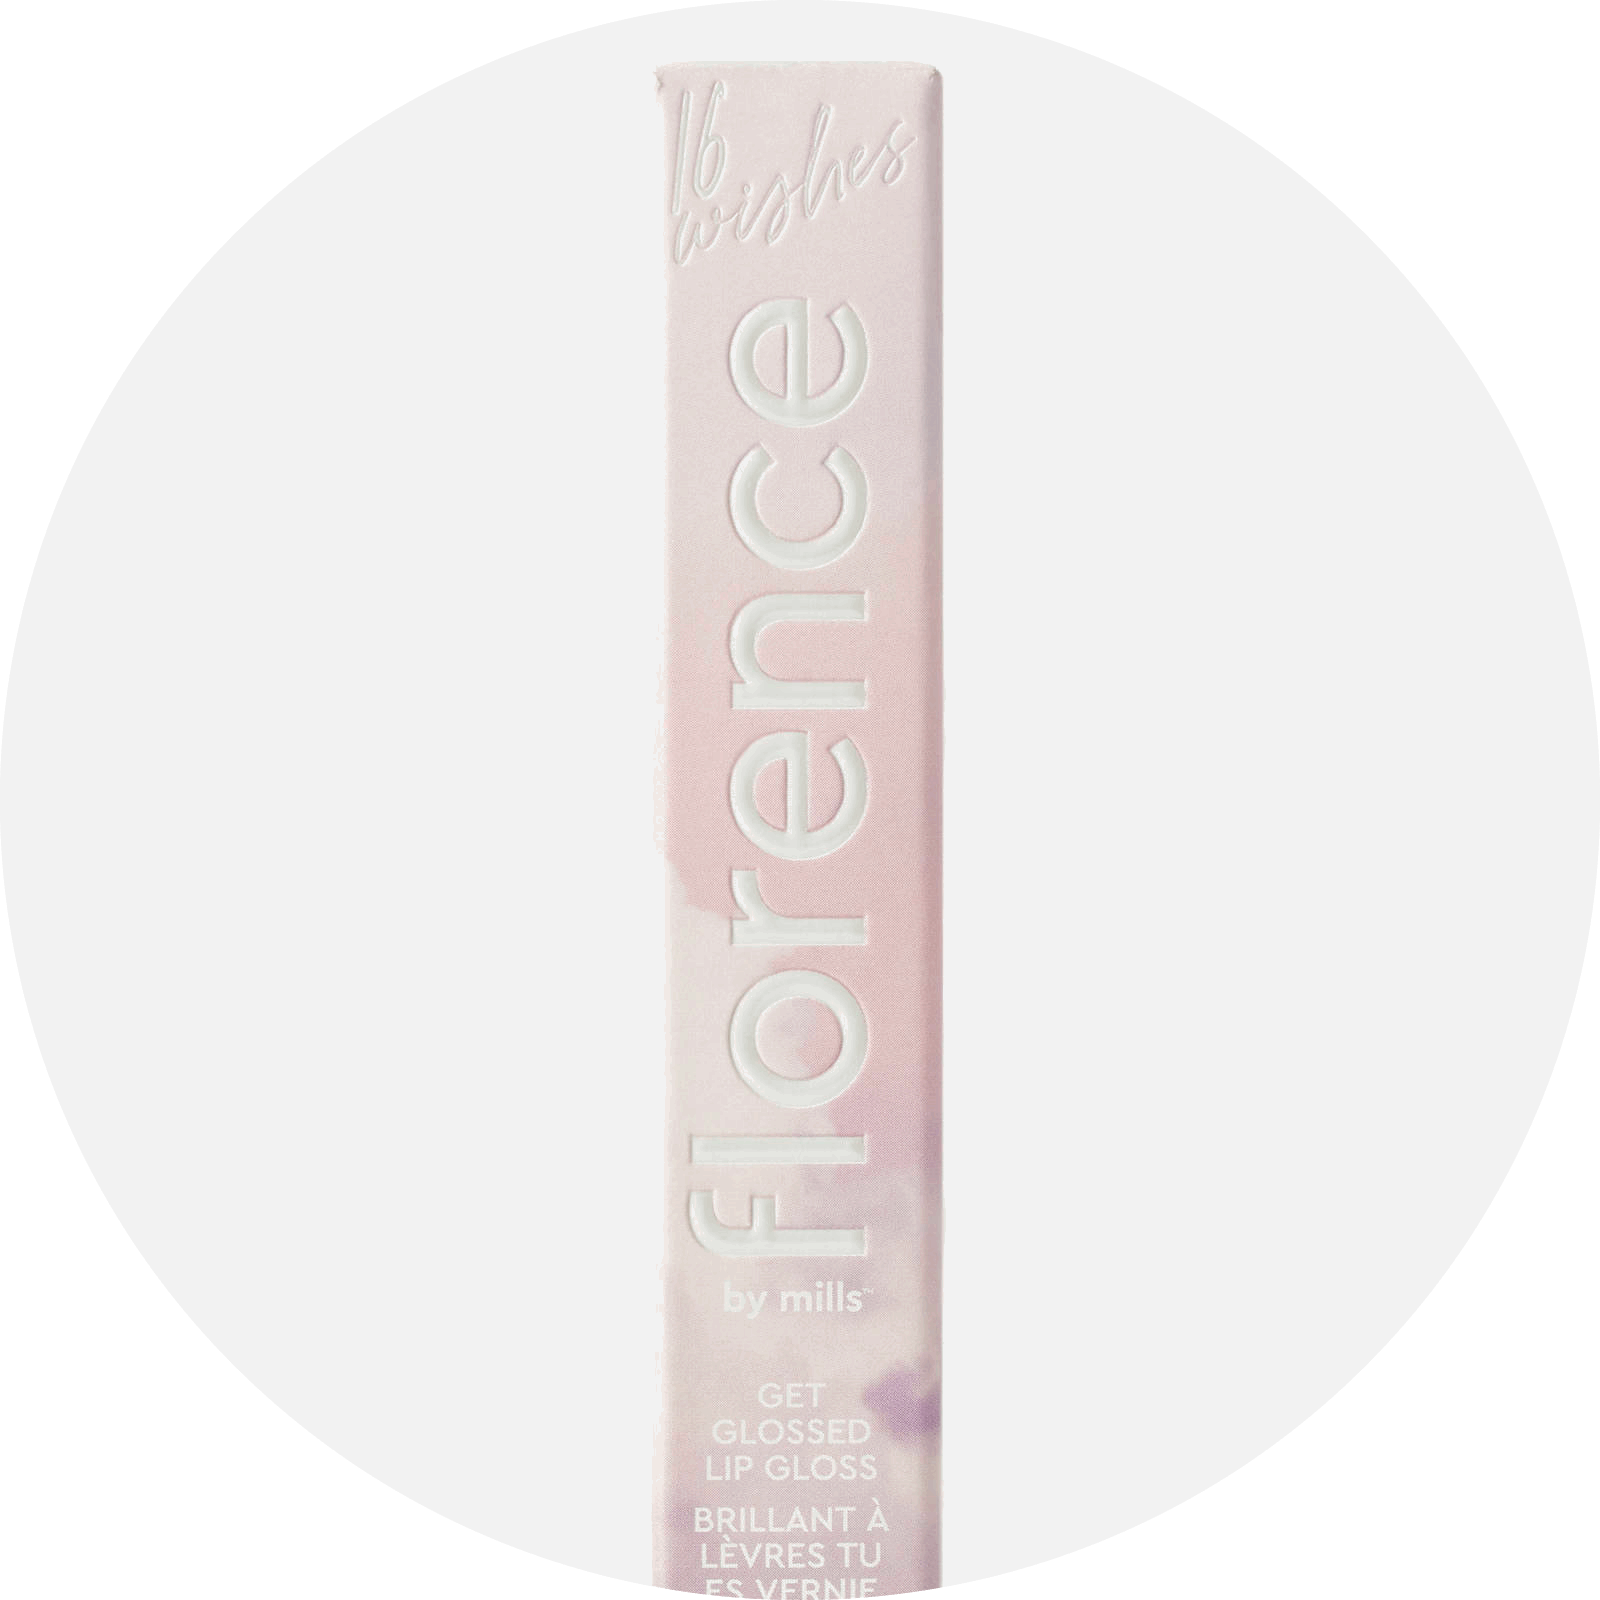 16 WISHES GET GLOSSED LIP GLOSS NudeFace Chile